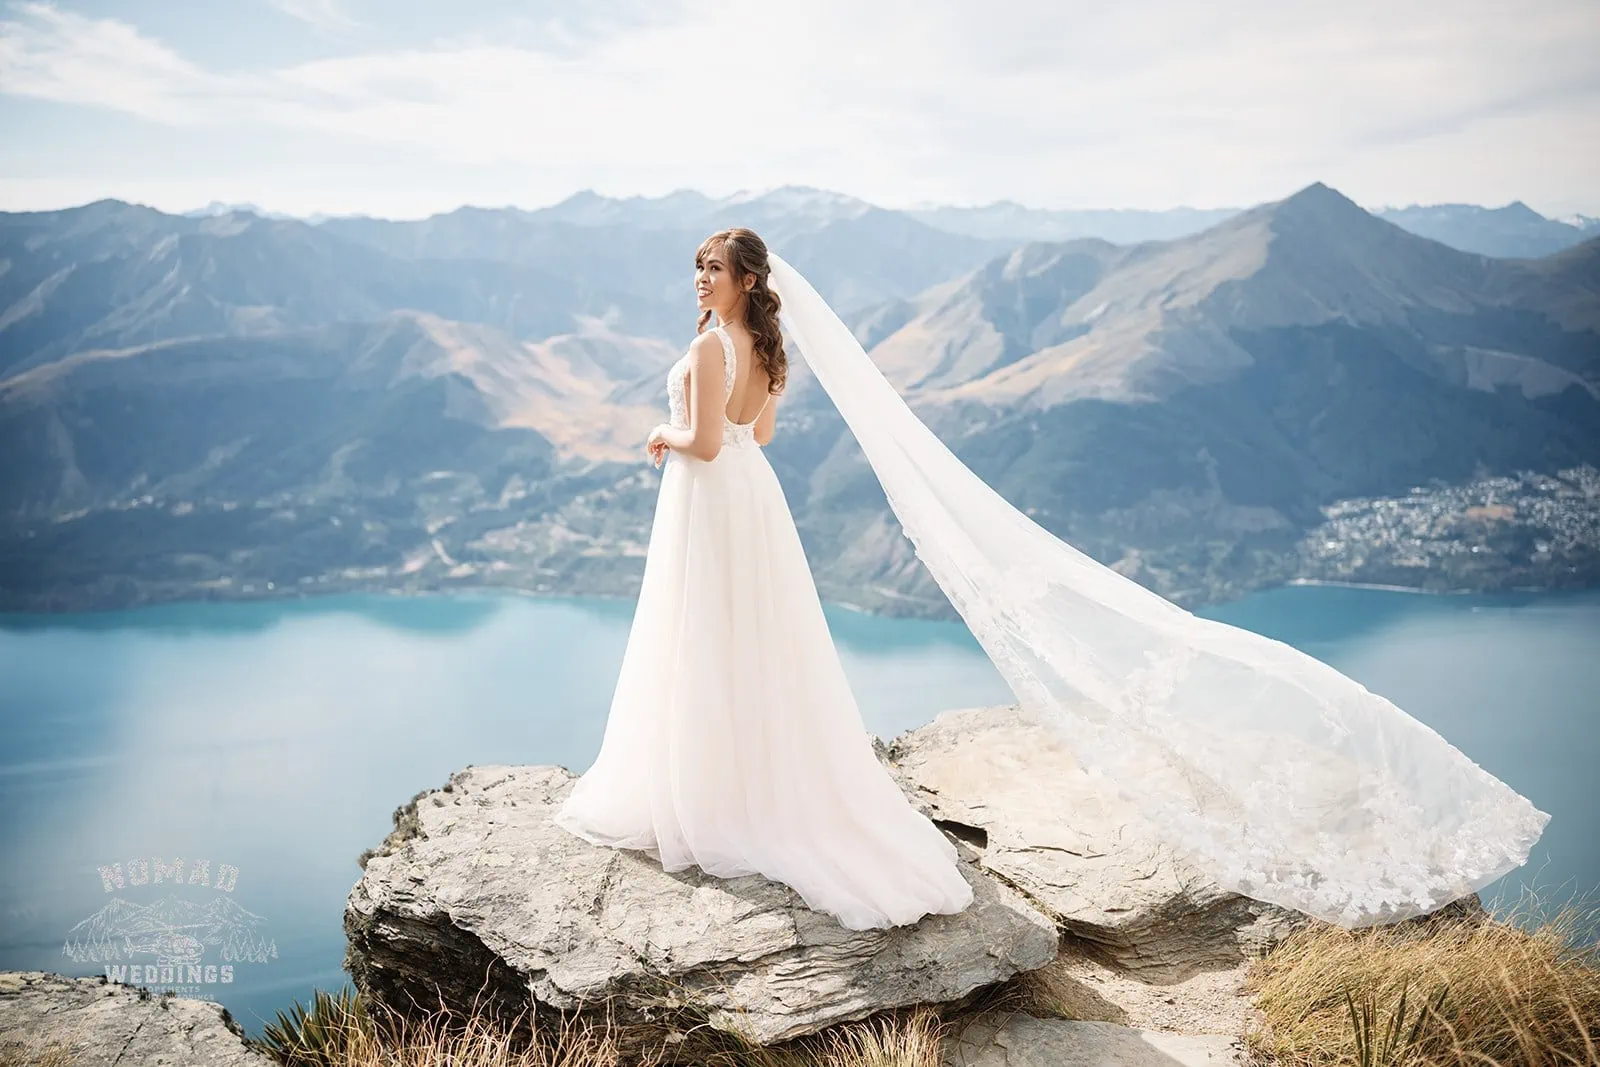 Nhi and Nicholas' pre-wedding shoot at Cecil Peak in Queenstown, New Zealand, with the bride overlooking Lake Wanaka from a mountain top.